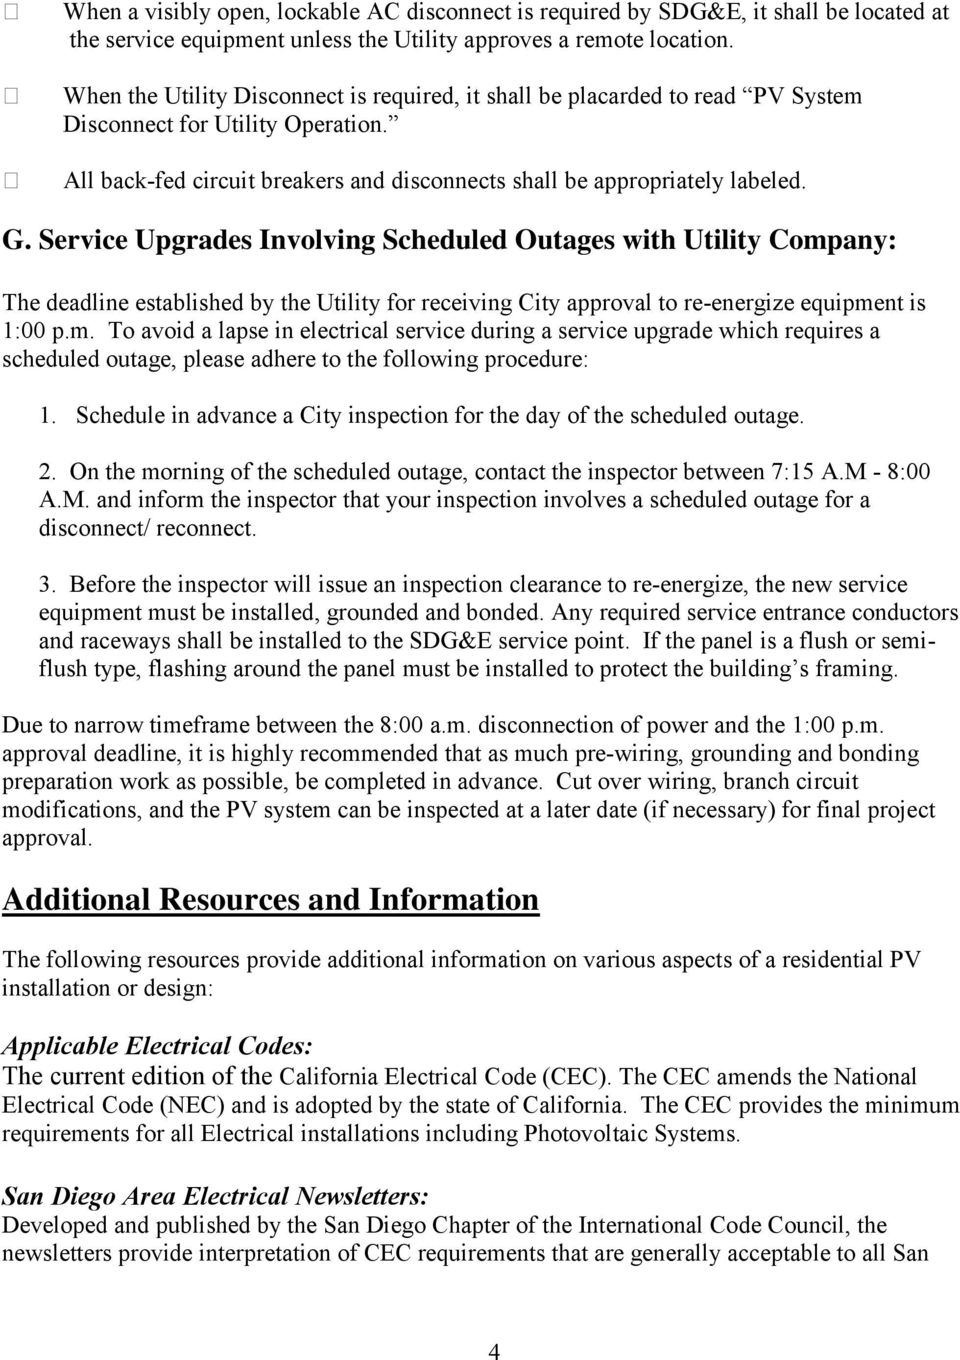 Service Upgrades Involving Scheduled Outages with Utility Comp